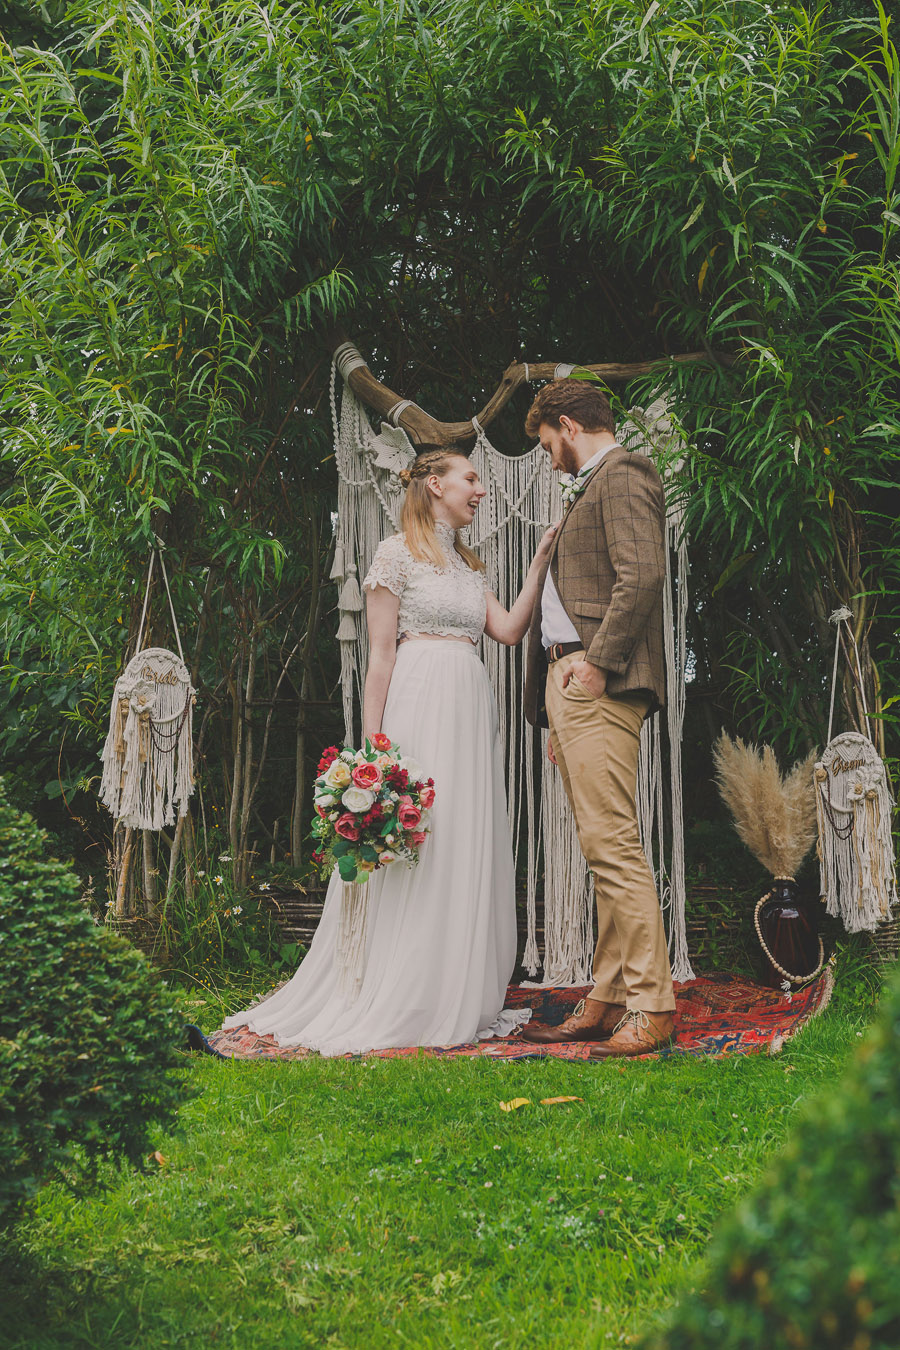 Boho beautiful - wedding inspiration from Chaucer Barn, with Eternal Images Photography Ltd (30)